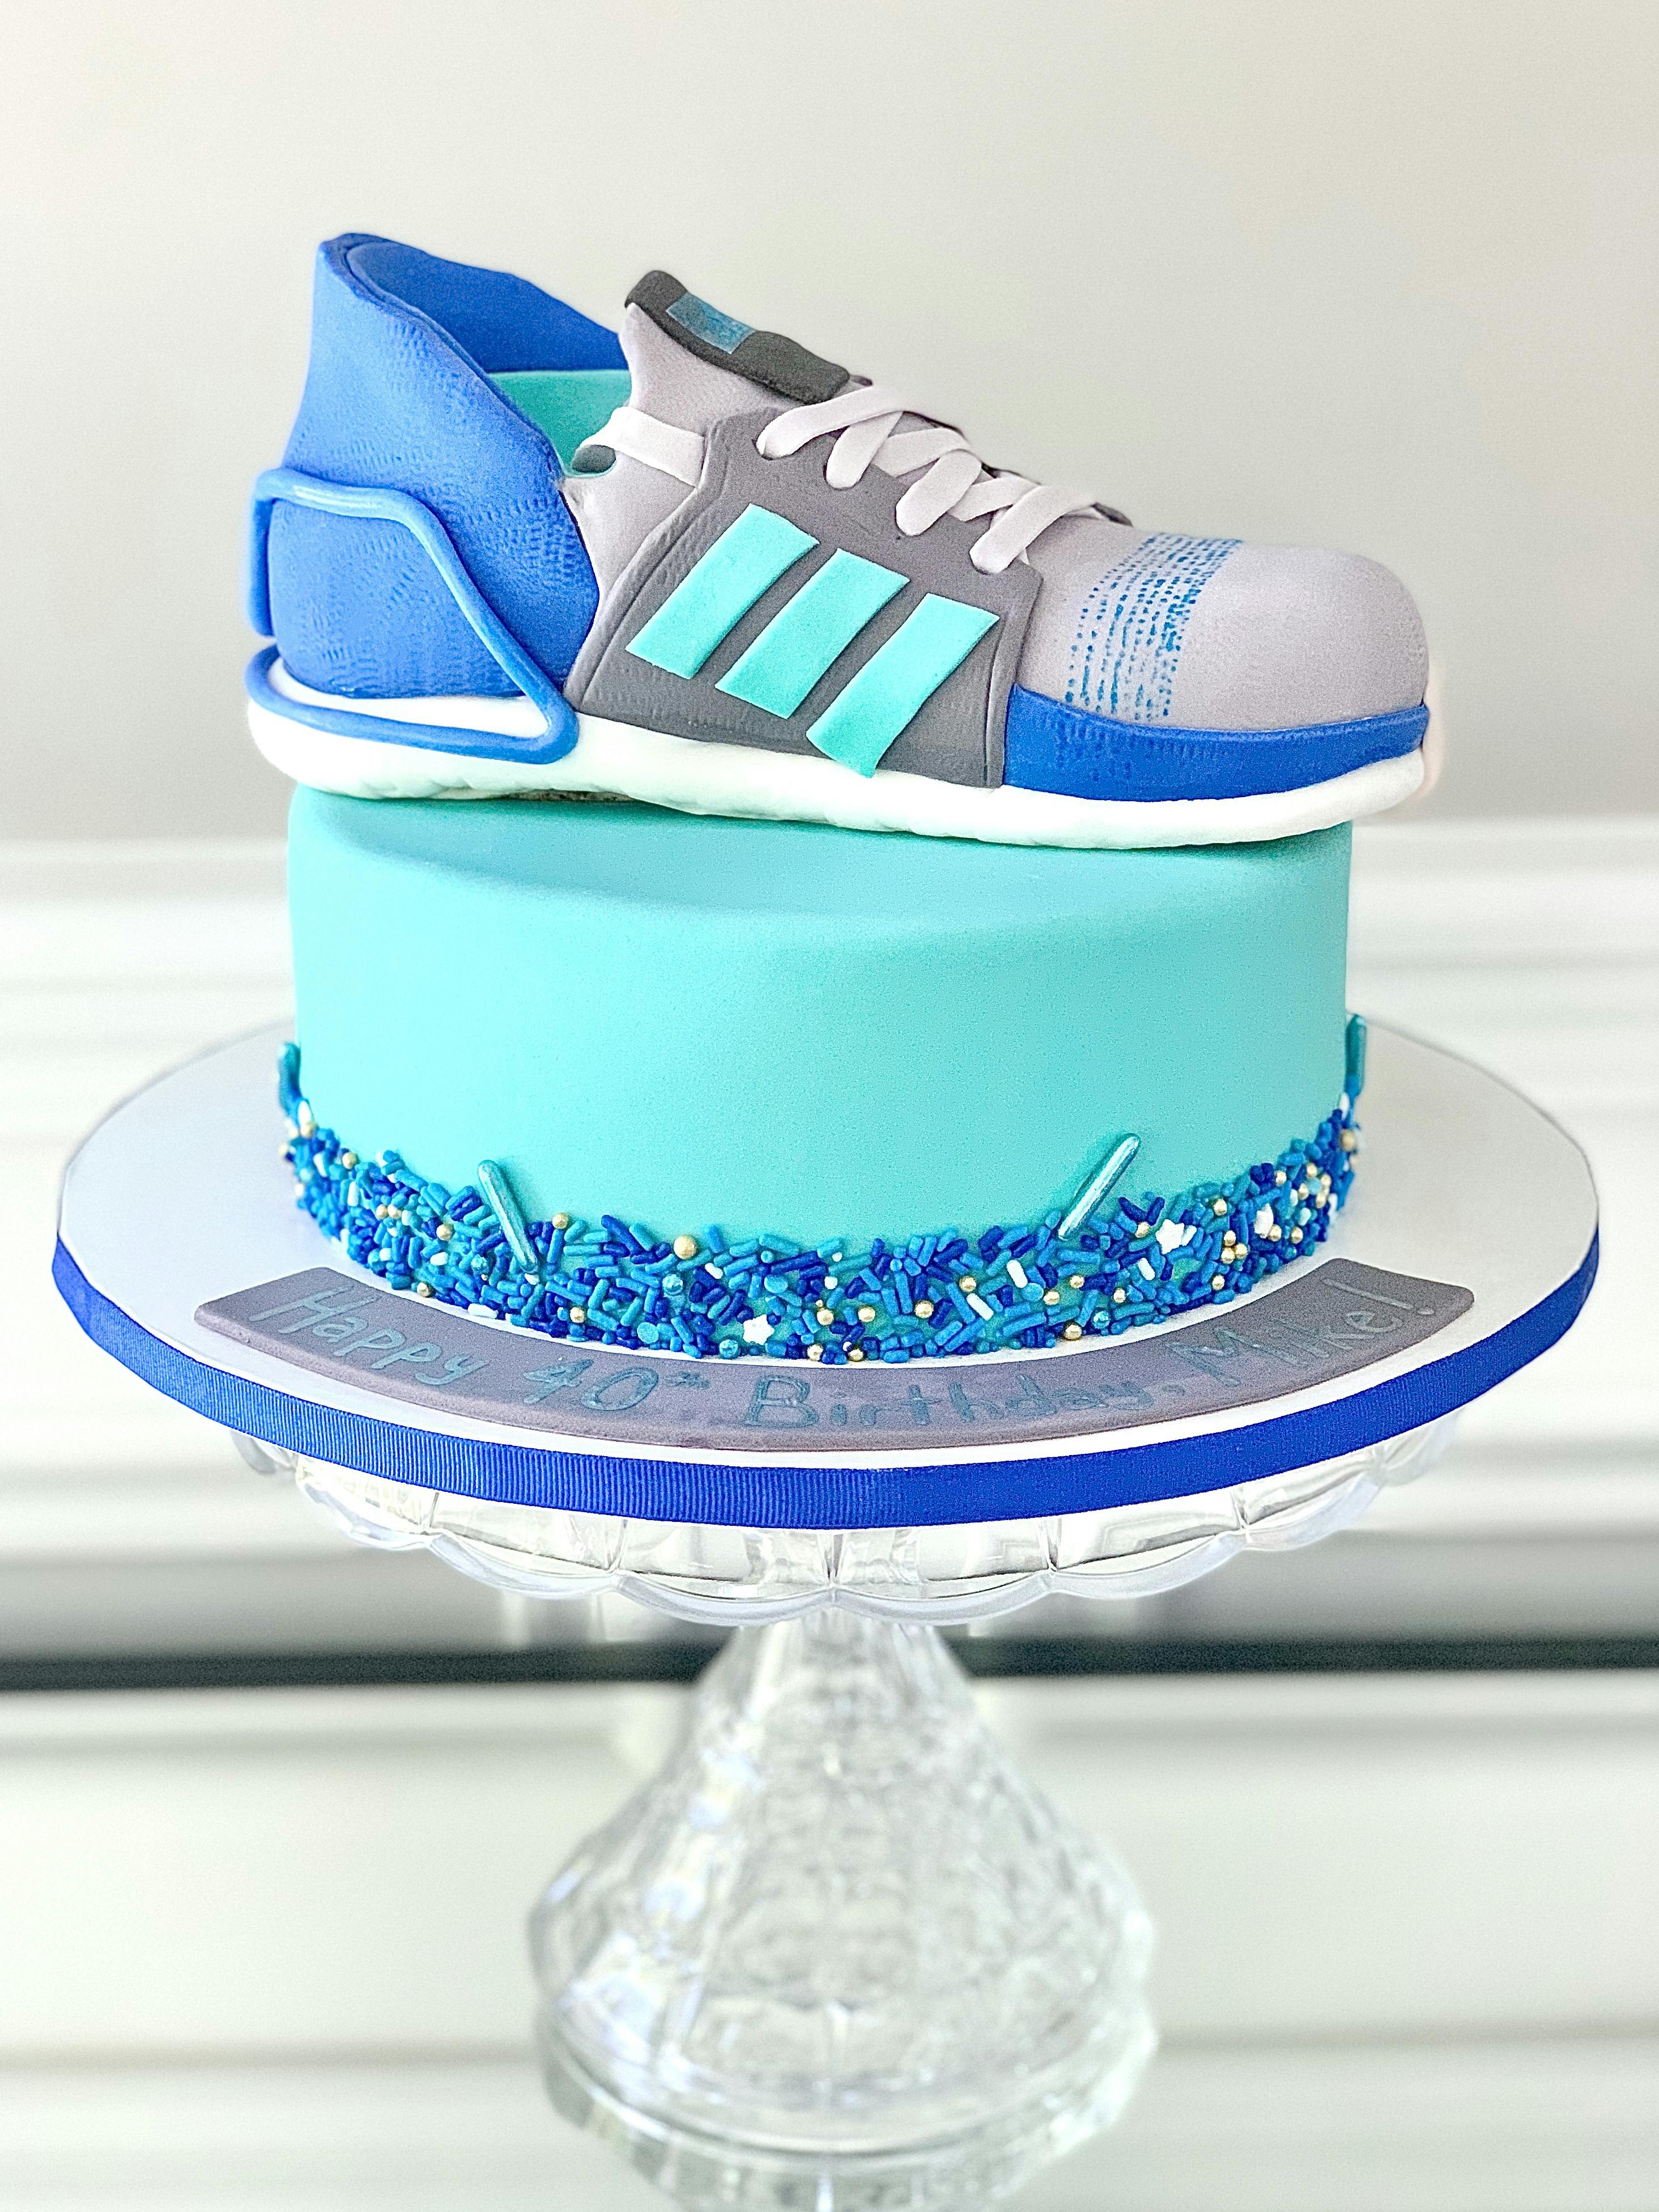 Adidas themed cake for a client 😊😊😊... has chocolate, vanilla, and red  velvet layers with whipped frosting. . . . . #adidascake #adidasthemecake # adidas... | By Royal Queen Cakes and Pastries | Facebook